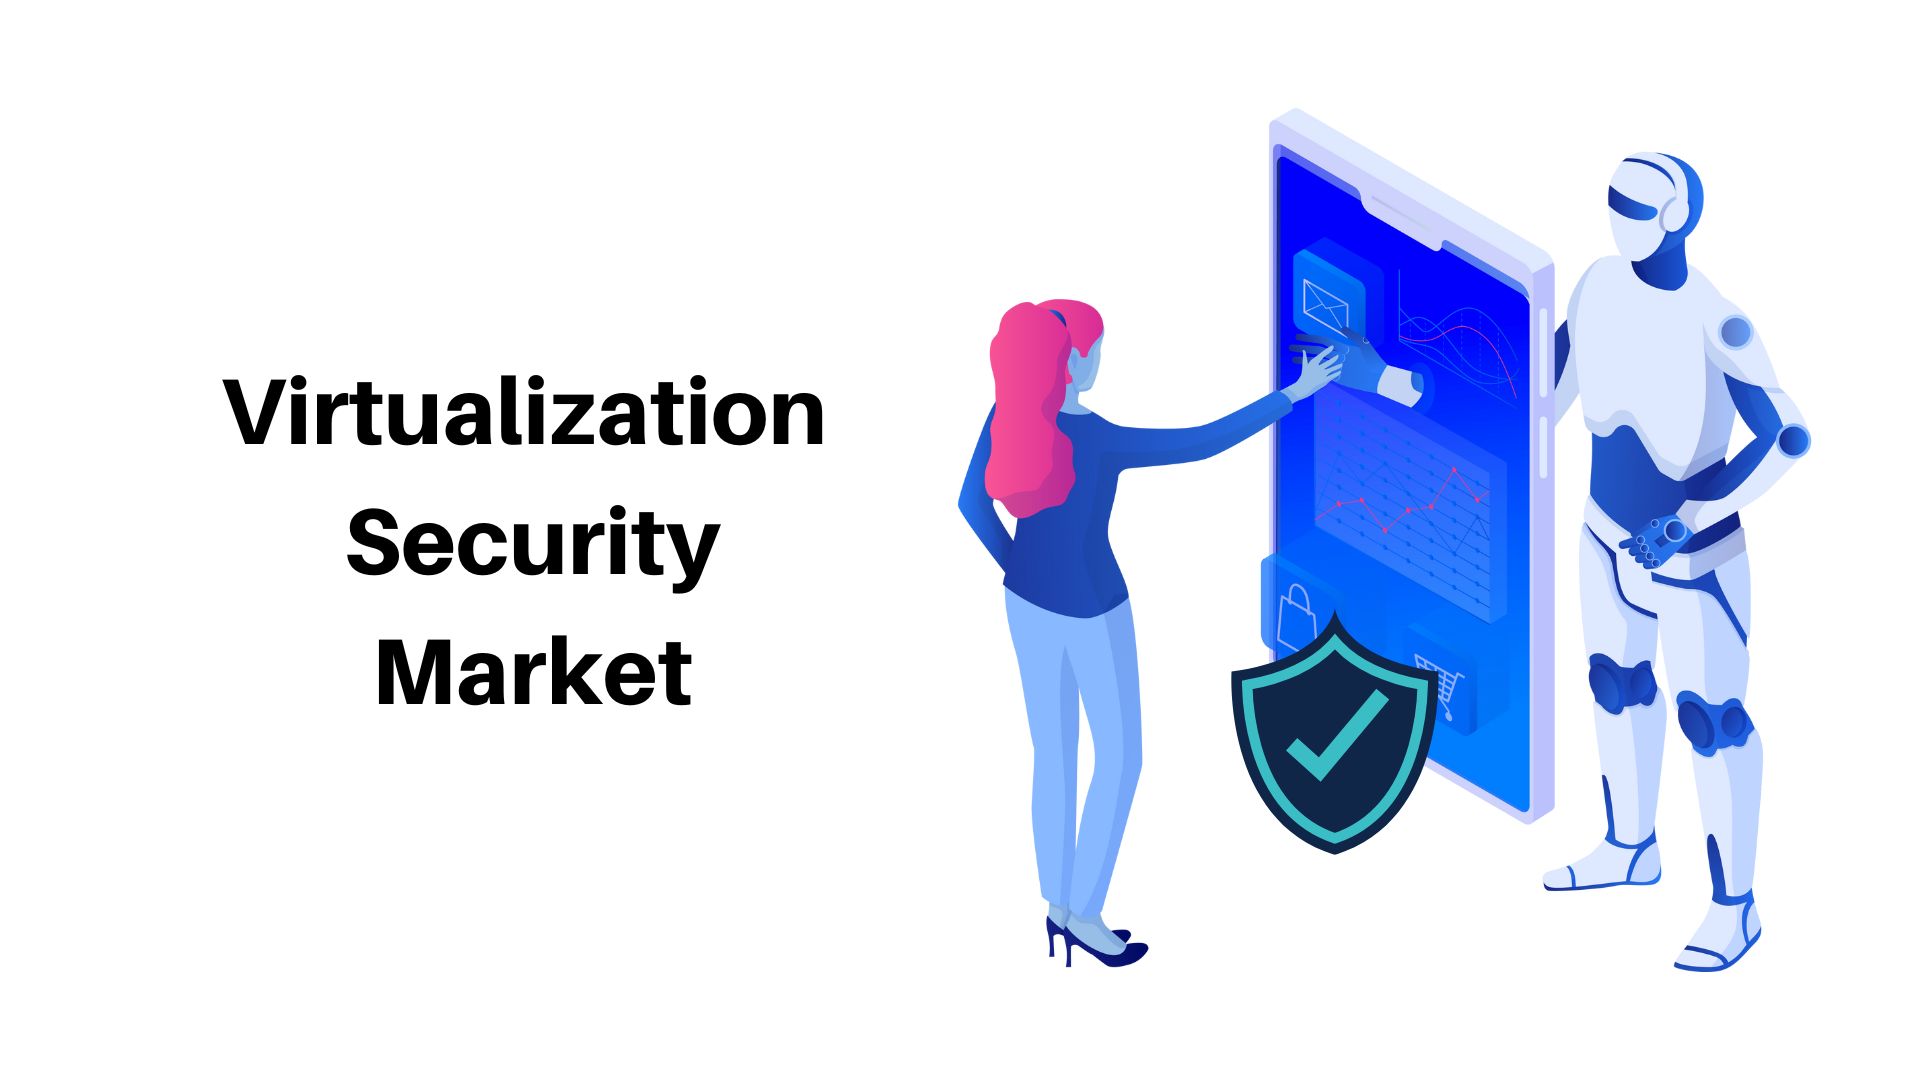 Virtualization Security Market Projected To Reach USD 11.5 Bn By 2033, at a CAGR Of 15.3%